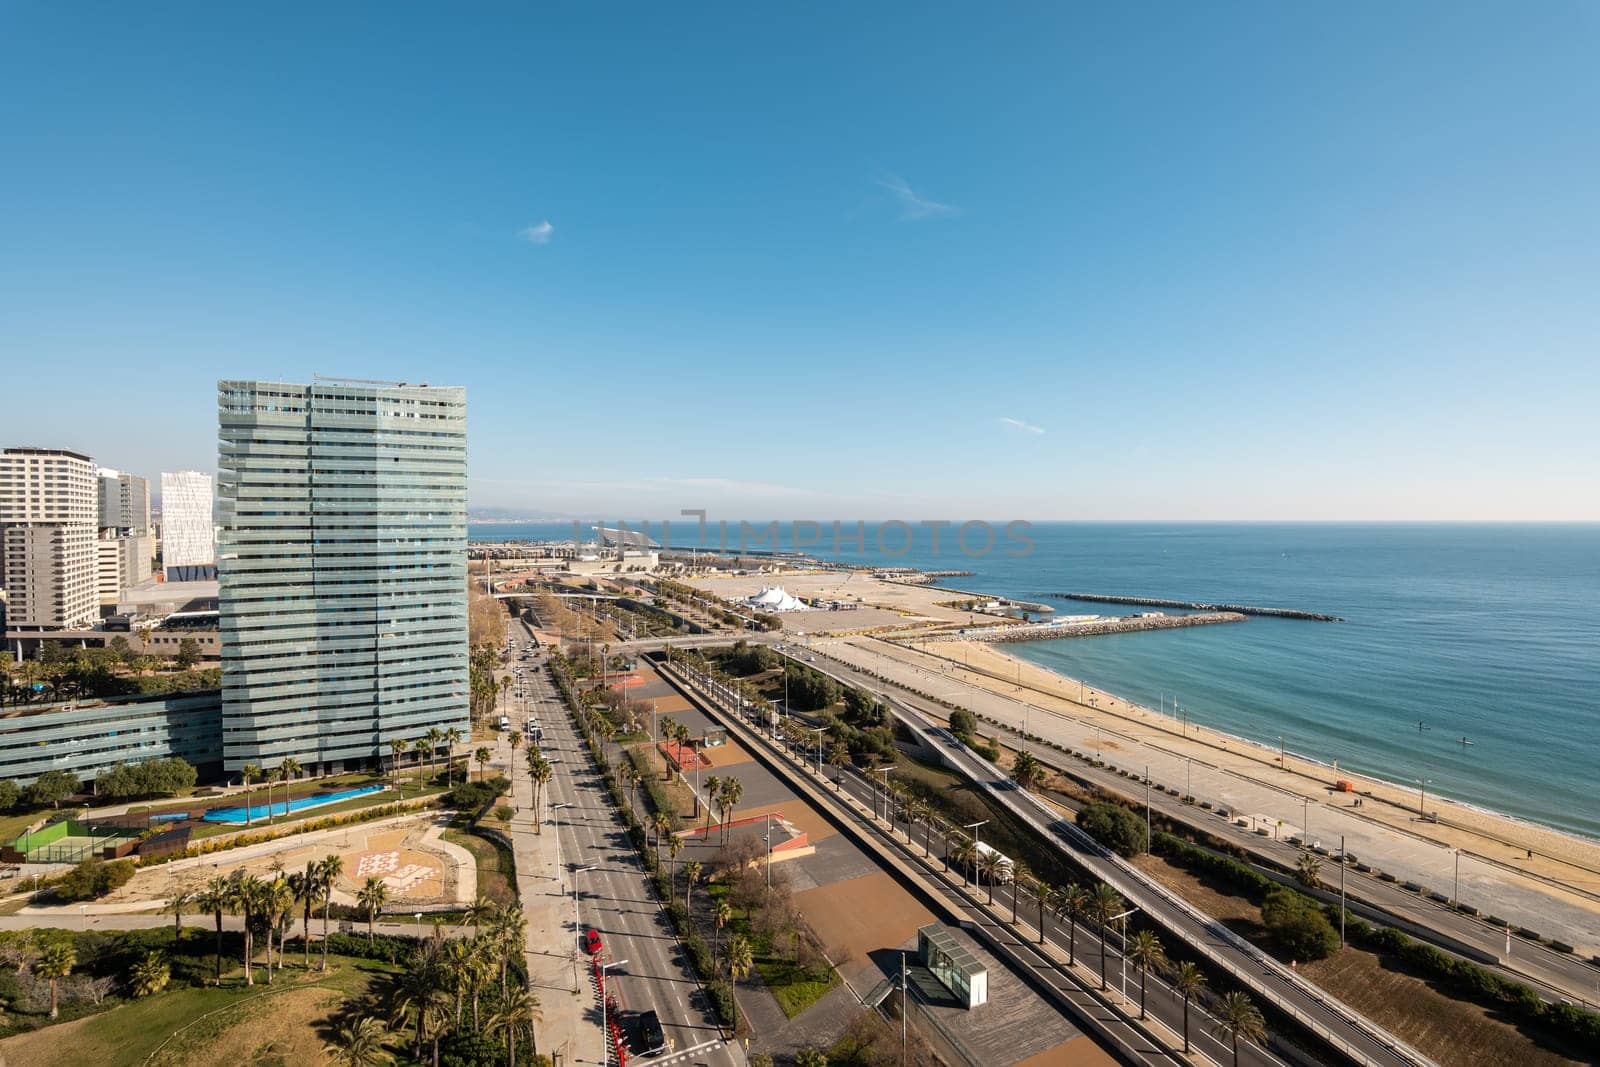 Sea waterfront in Diagonal Mar area in Barcelona with skyscrapers. Coastline area of city with highway and urban beaches. Place of dreams